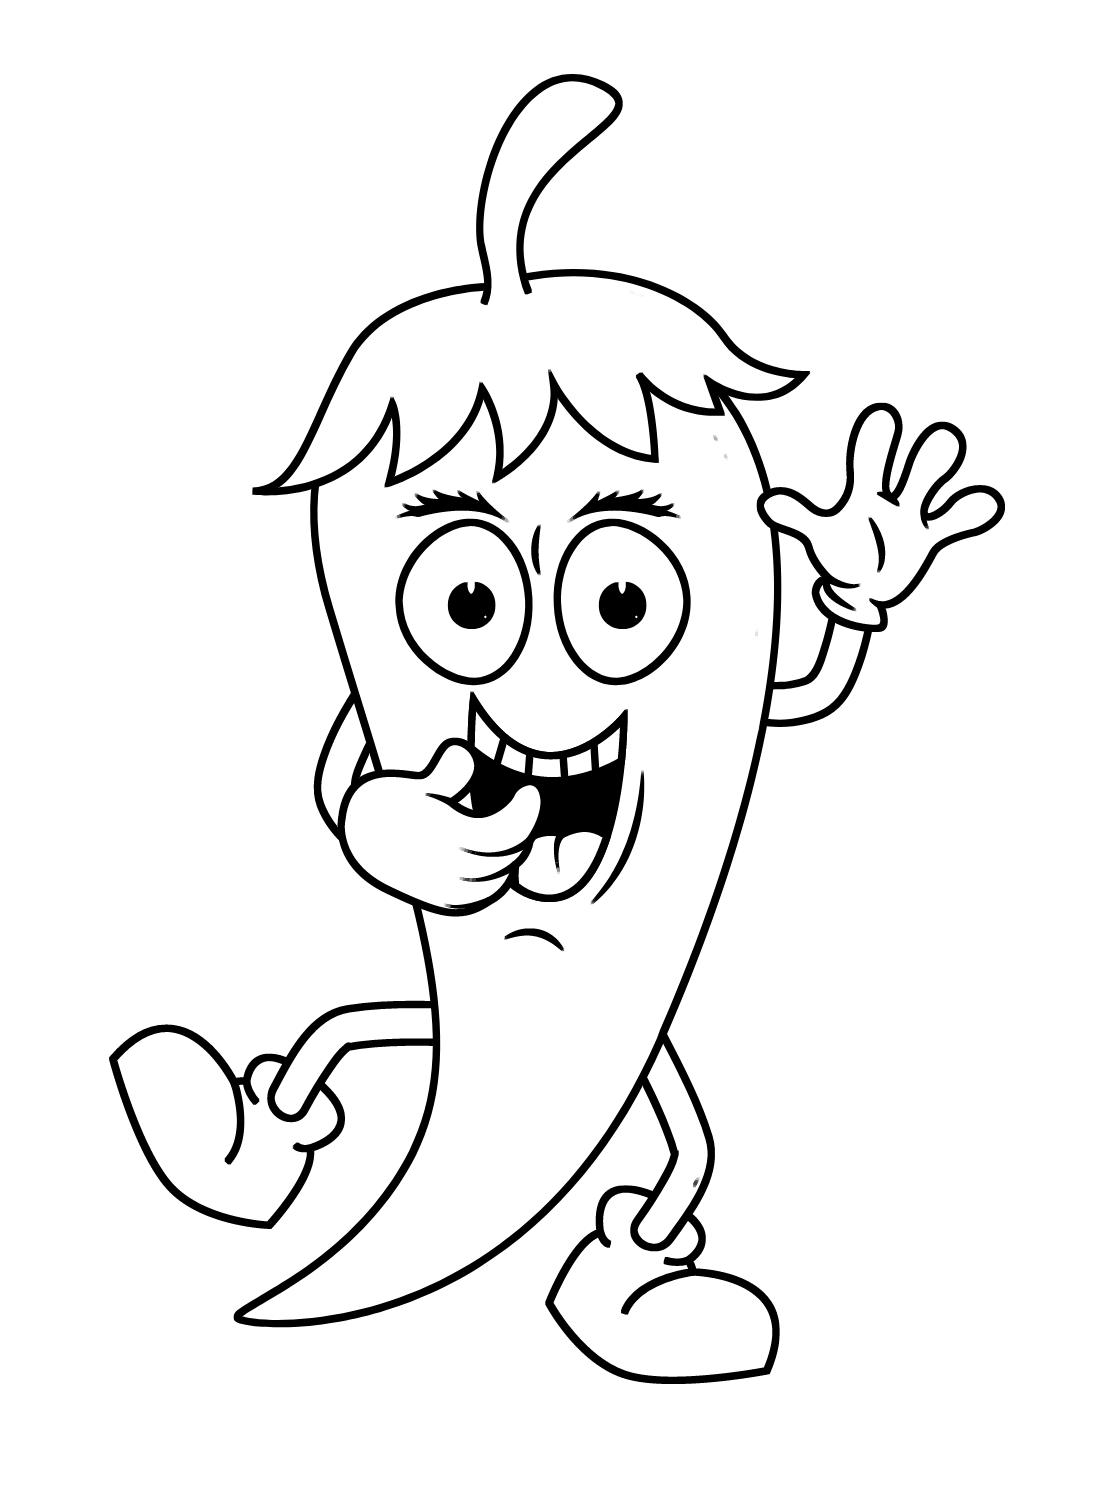 coloring-pages-chili-peppers